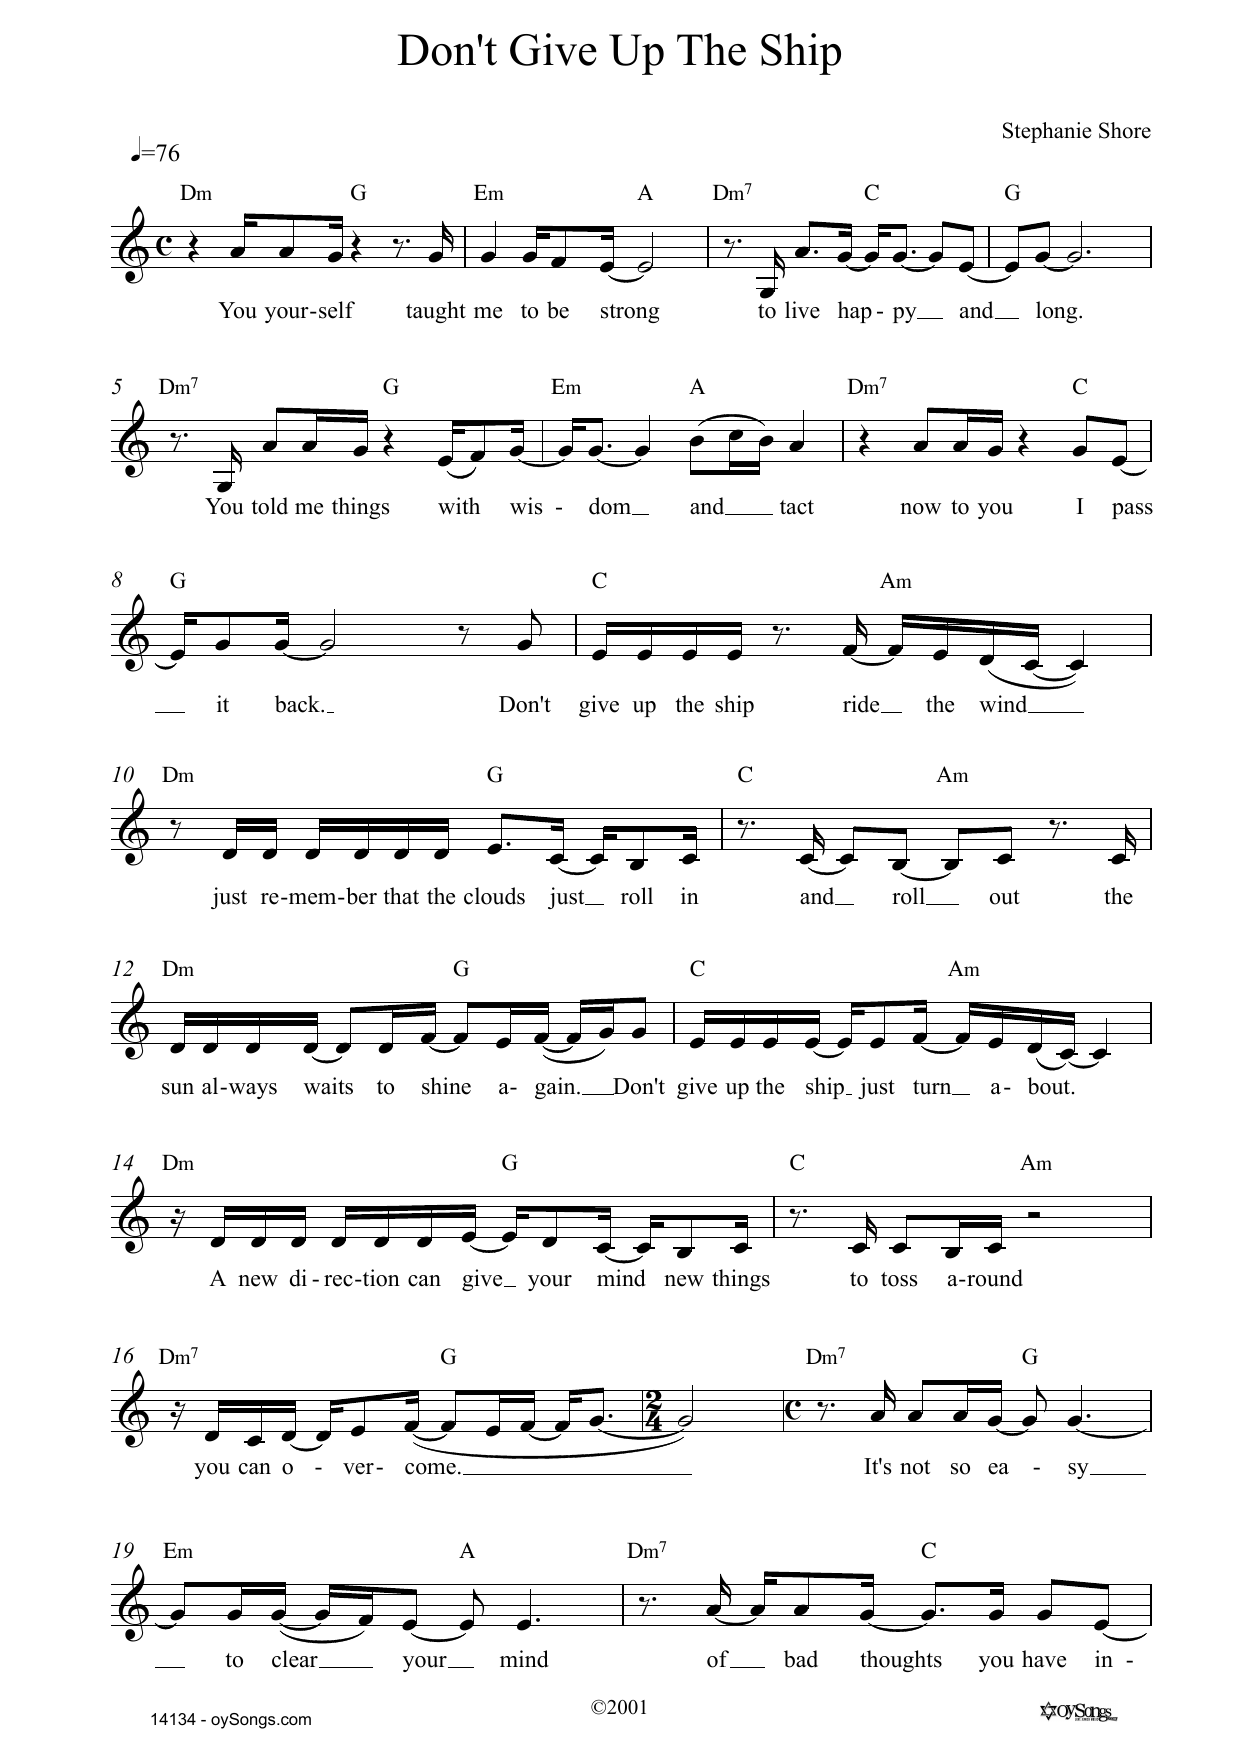 Download Stephanie Shore Don't Give Up The Ship Sheet Music